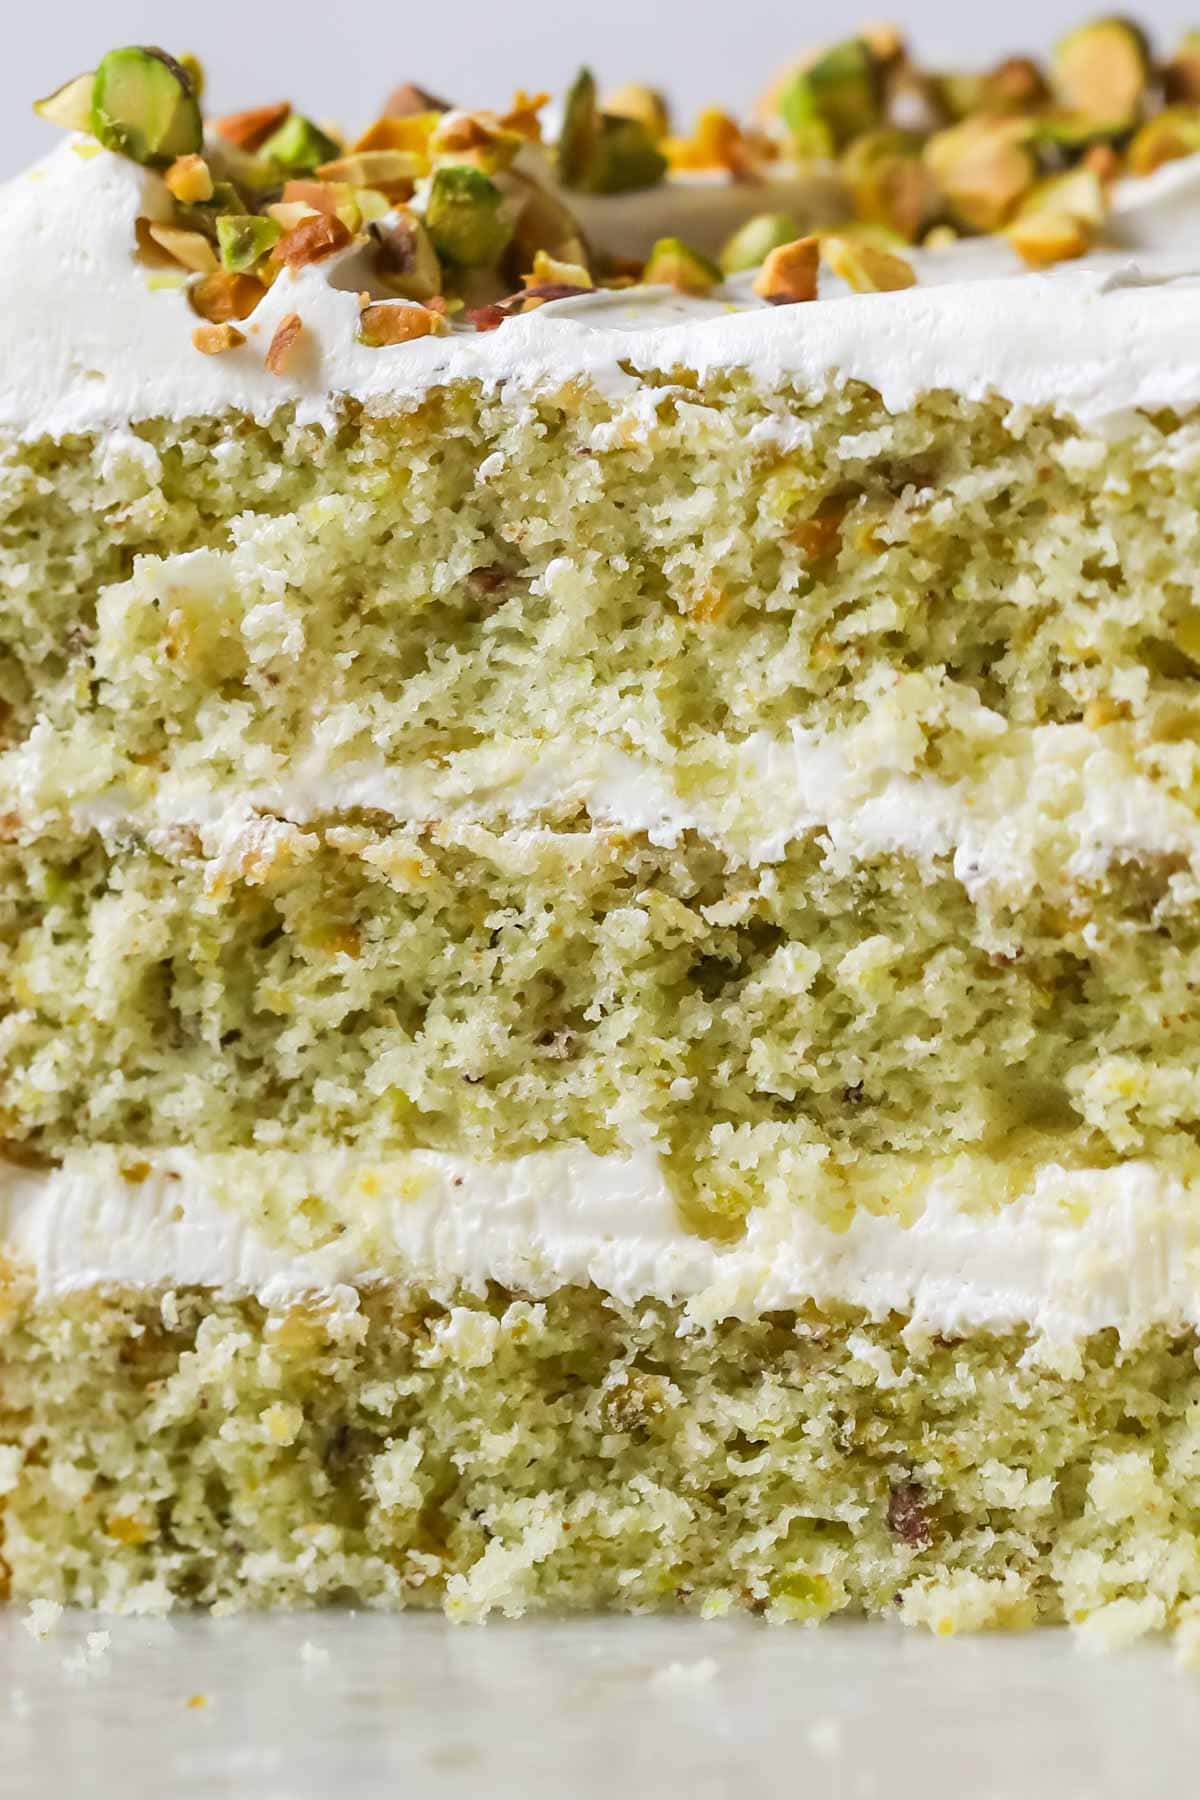 Close-up view of a slice of pistachio cake made with three layers of green cake and a swiss meringue buttercream frosting.